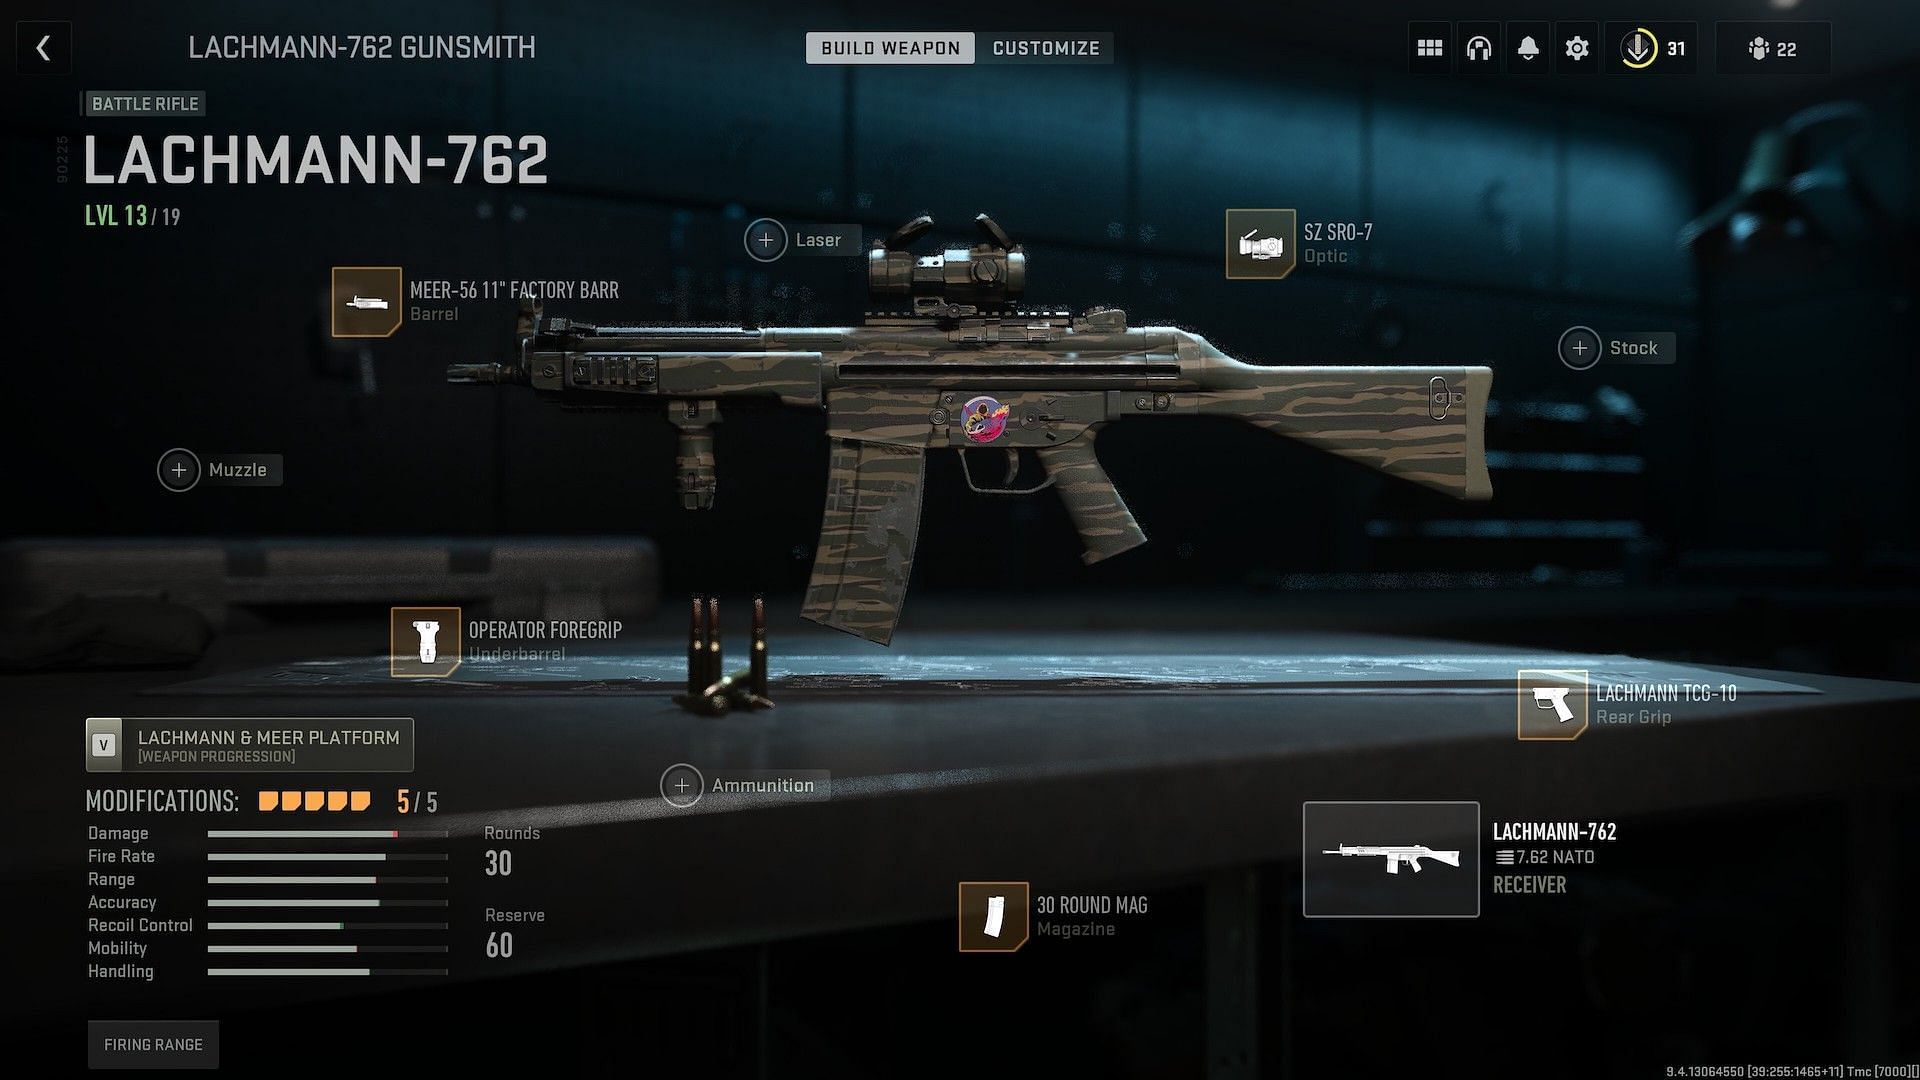 Lachmann 762 Loadout in MW2 (Image via Activision)